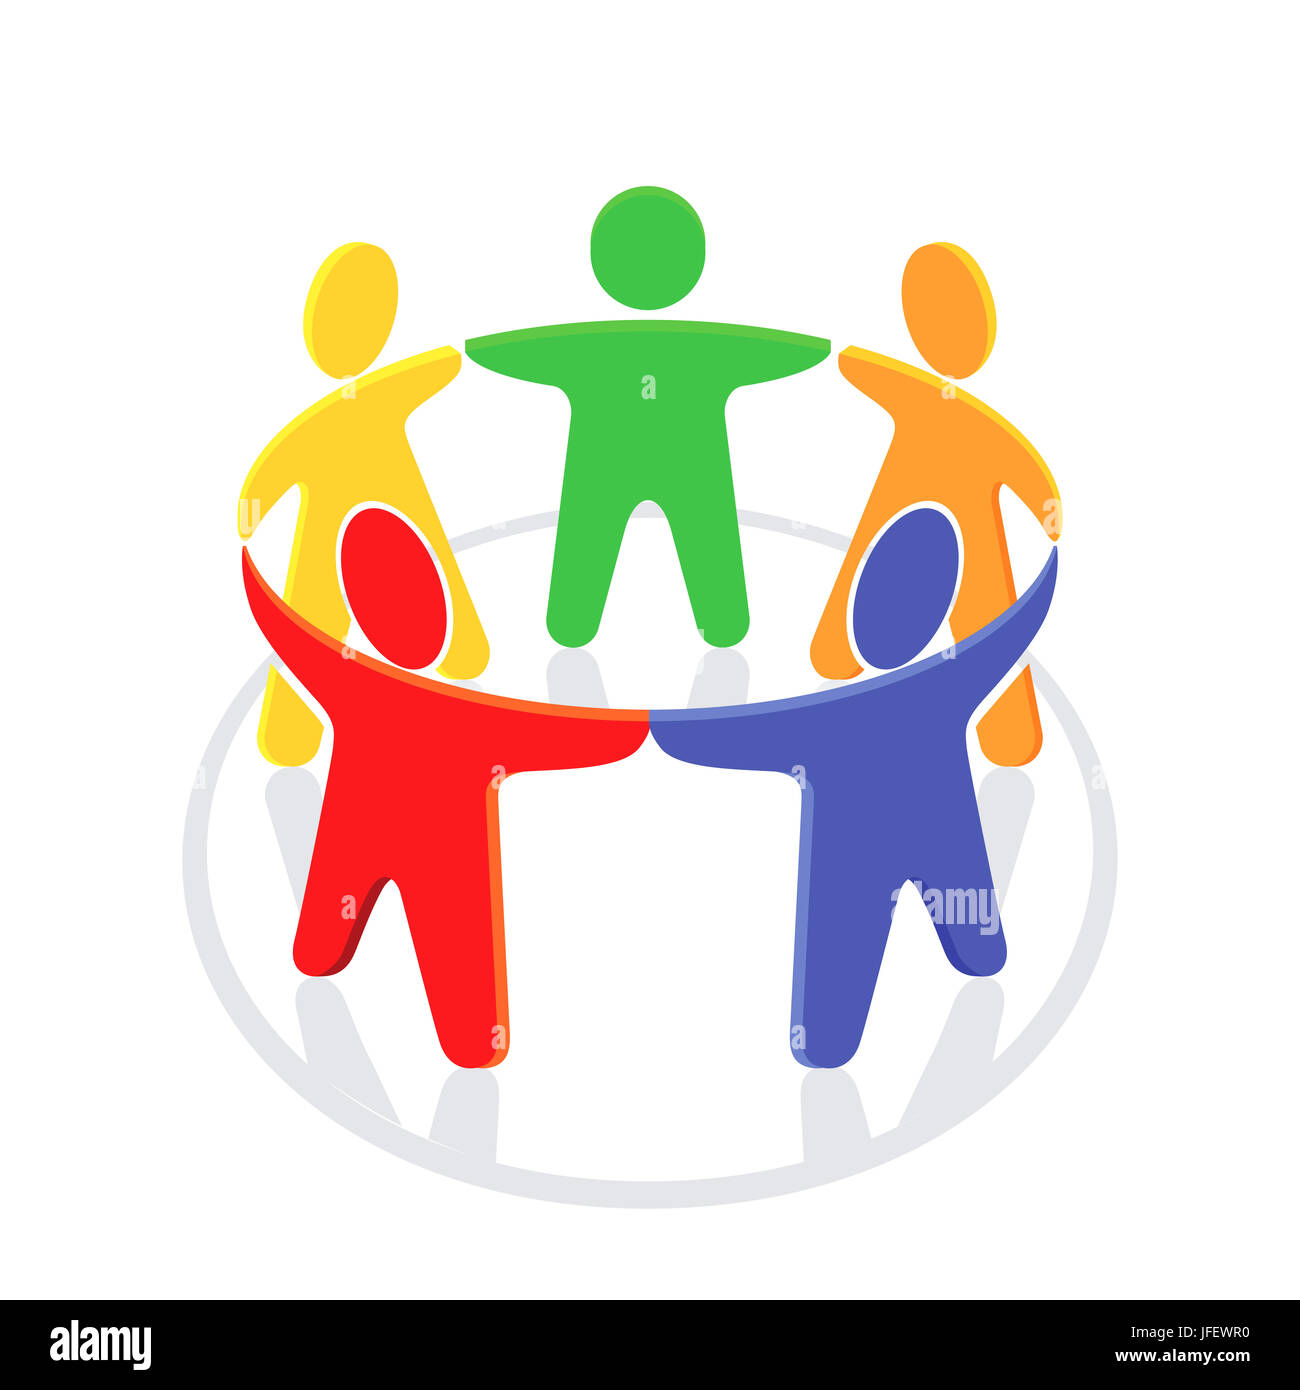 Unity in the group, illustration on white Stock Photo